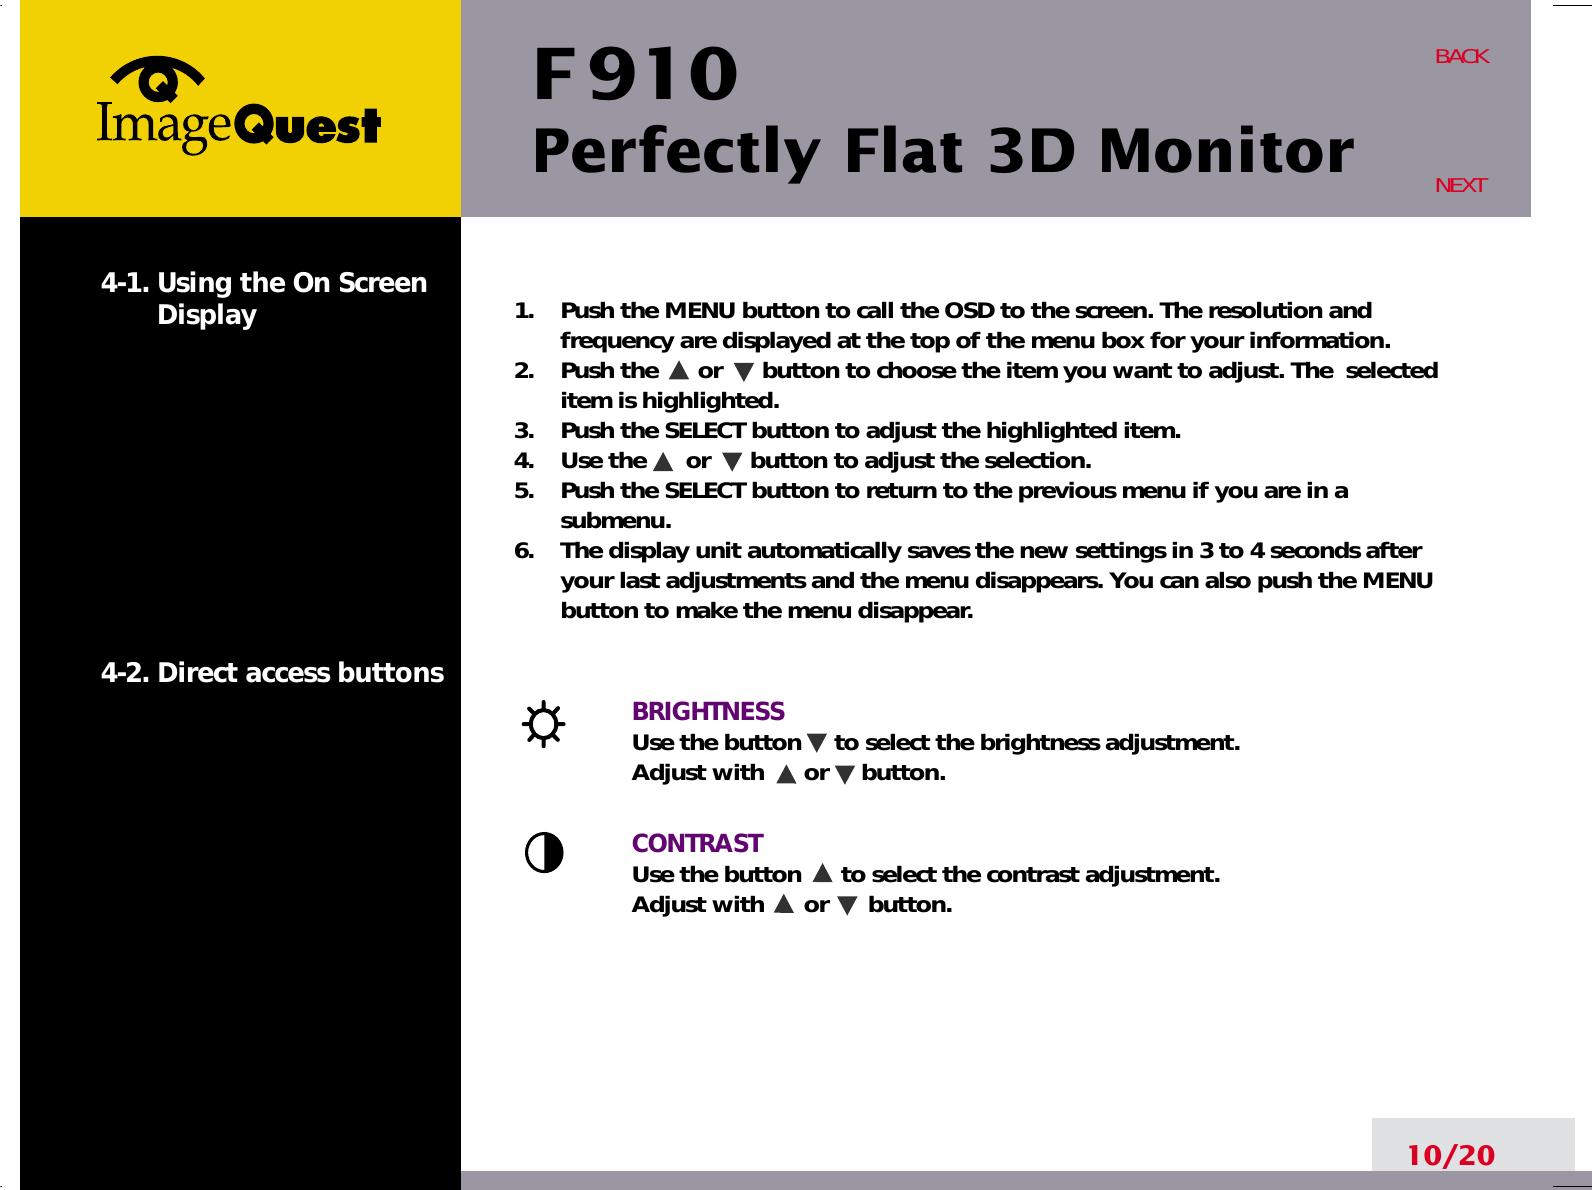 F 910Perfectly Flat 3D Monitor10/20BACKNEXT1.    Push the MENU button to call the OSD to the screen. The resolution andfrequency are displayed at the top of the menu box for your information.2.    Push the      or      button to choose the item you want to adjust. The  selecteditem is highlighted.3.    Push the SELECT button to adjust the highlighted item. 4.    Use the      or      button to adjust the selection.5.    Push the SELECT button to return to the previous menu if you are in asubmenu.6.    The display unit automatically saves the new settings in 3 to 4 seconds afteryour last adjustments and the menu disappears. You can also push the MENUbutton to make the menu disappear.BRIGHTNESS Use the button     to select the brightness adjustment. Adjust with      or     button.CONTRASTUse the button      to select the contrast adjustment. Adjust with      or      button.4-1. Using the On ScreenDisplay 4-2. Direct access buttons